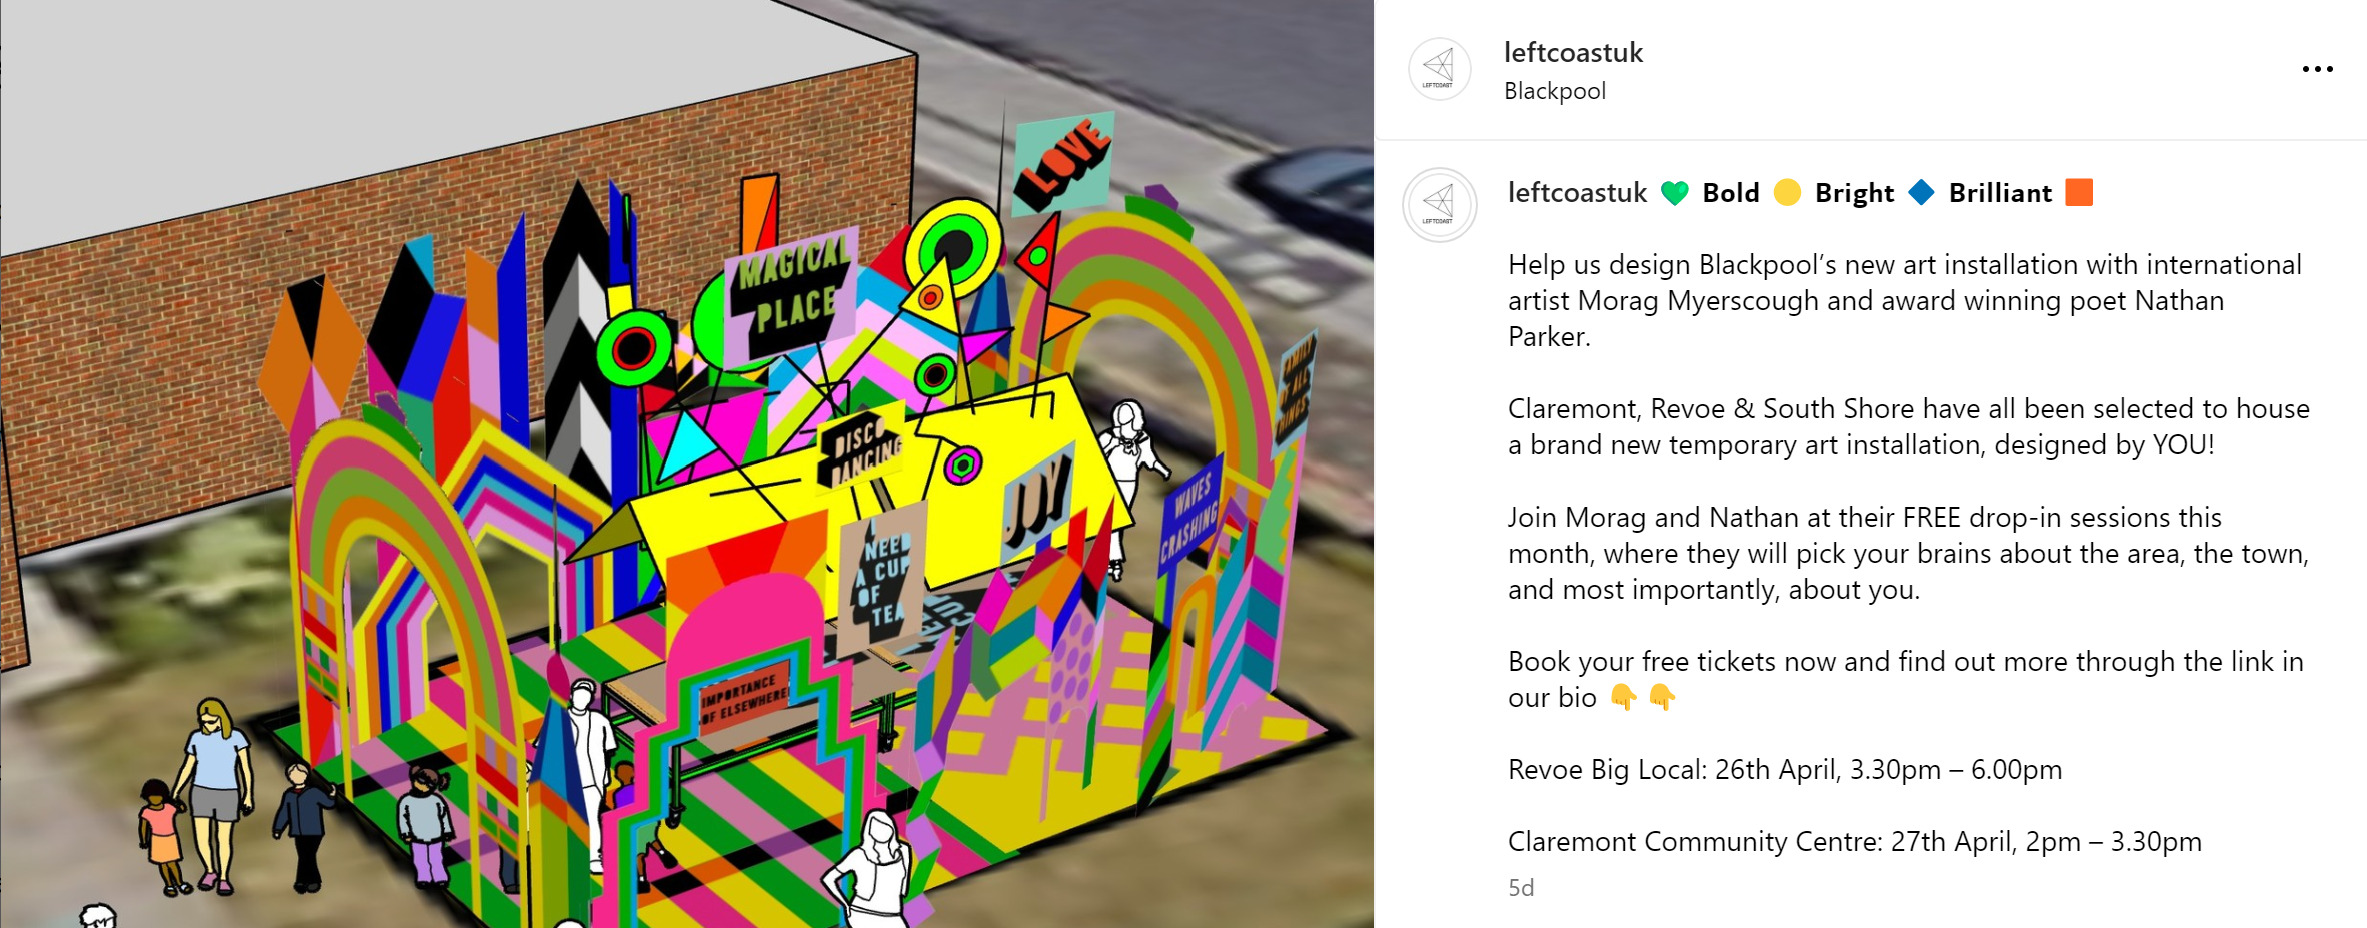 A LeftCoast post on Instagram from April 2023. The image shoss a colourful graphic imagination of an art installation in a public place. The text invites people to attendee a drop-in session with the installation artists so the public can consult on the planning of the work.